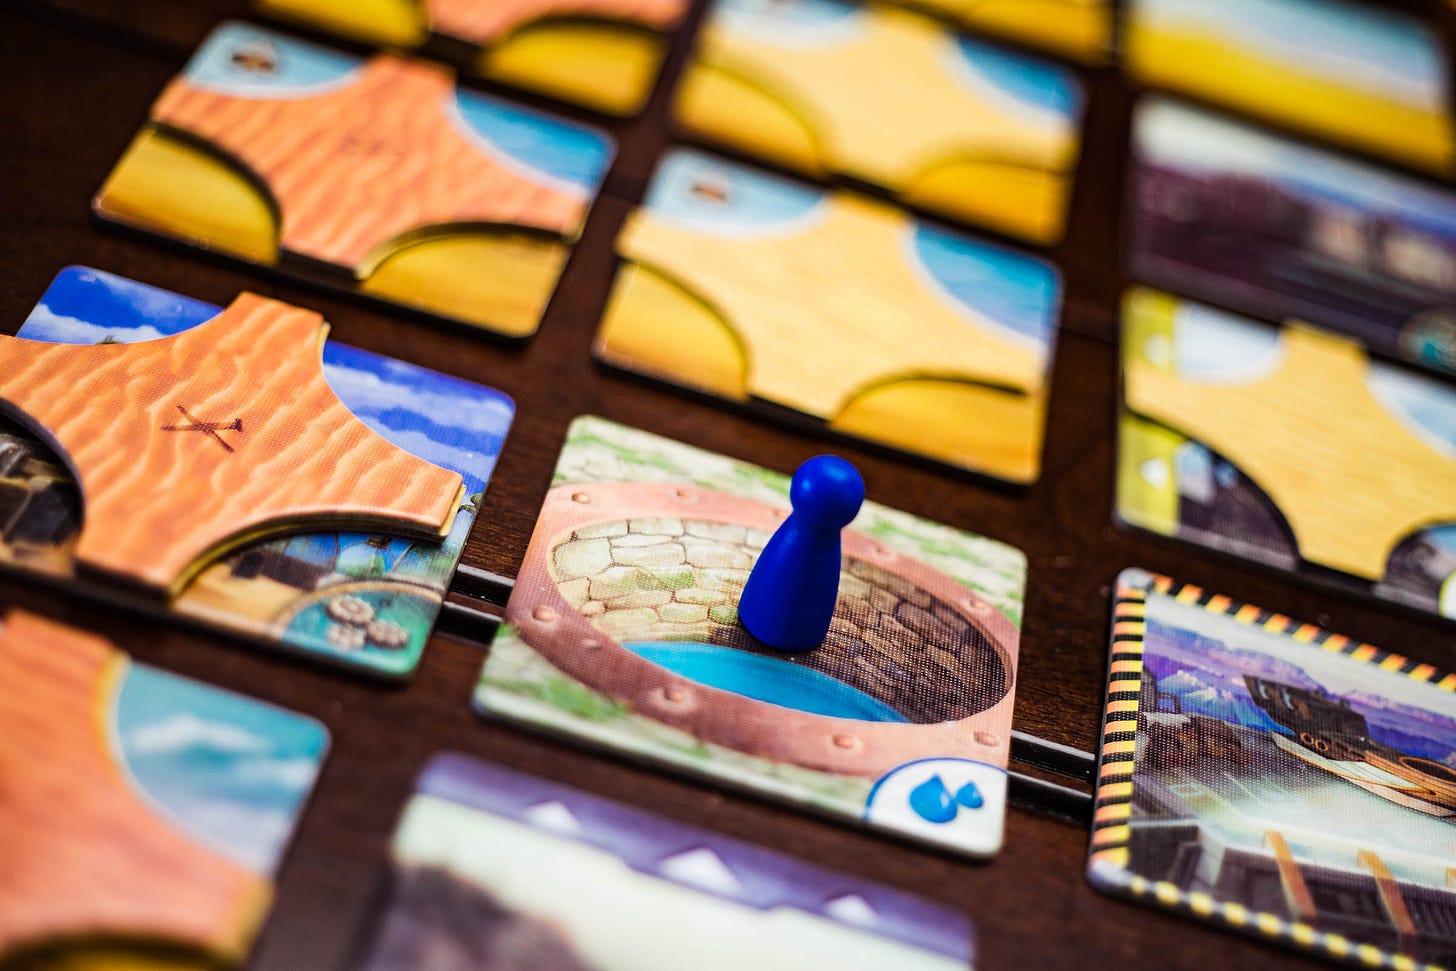 The board game Forbidden Desert, with a pawn on a water tile.